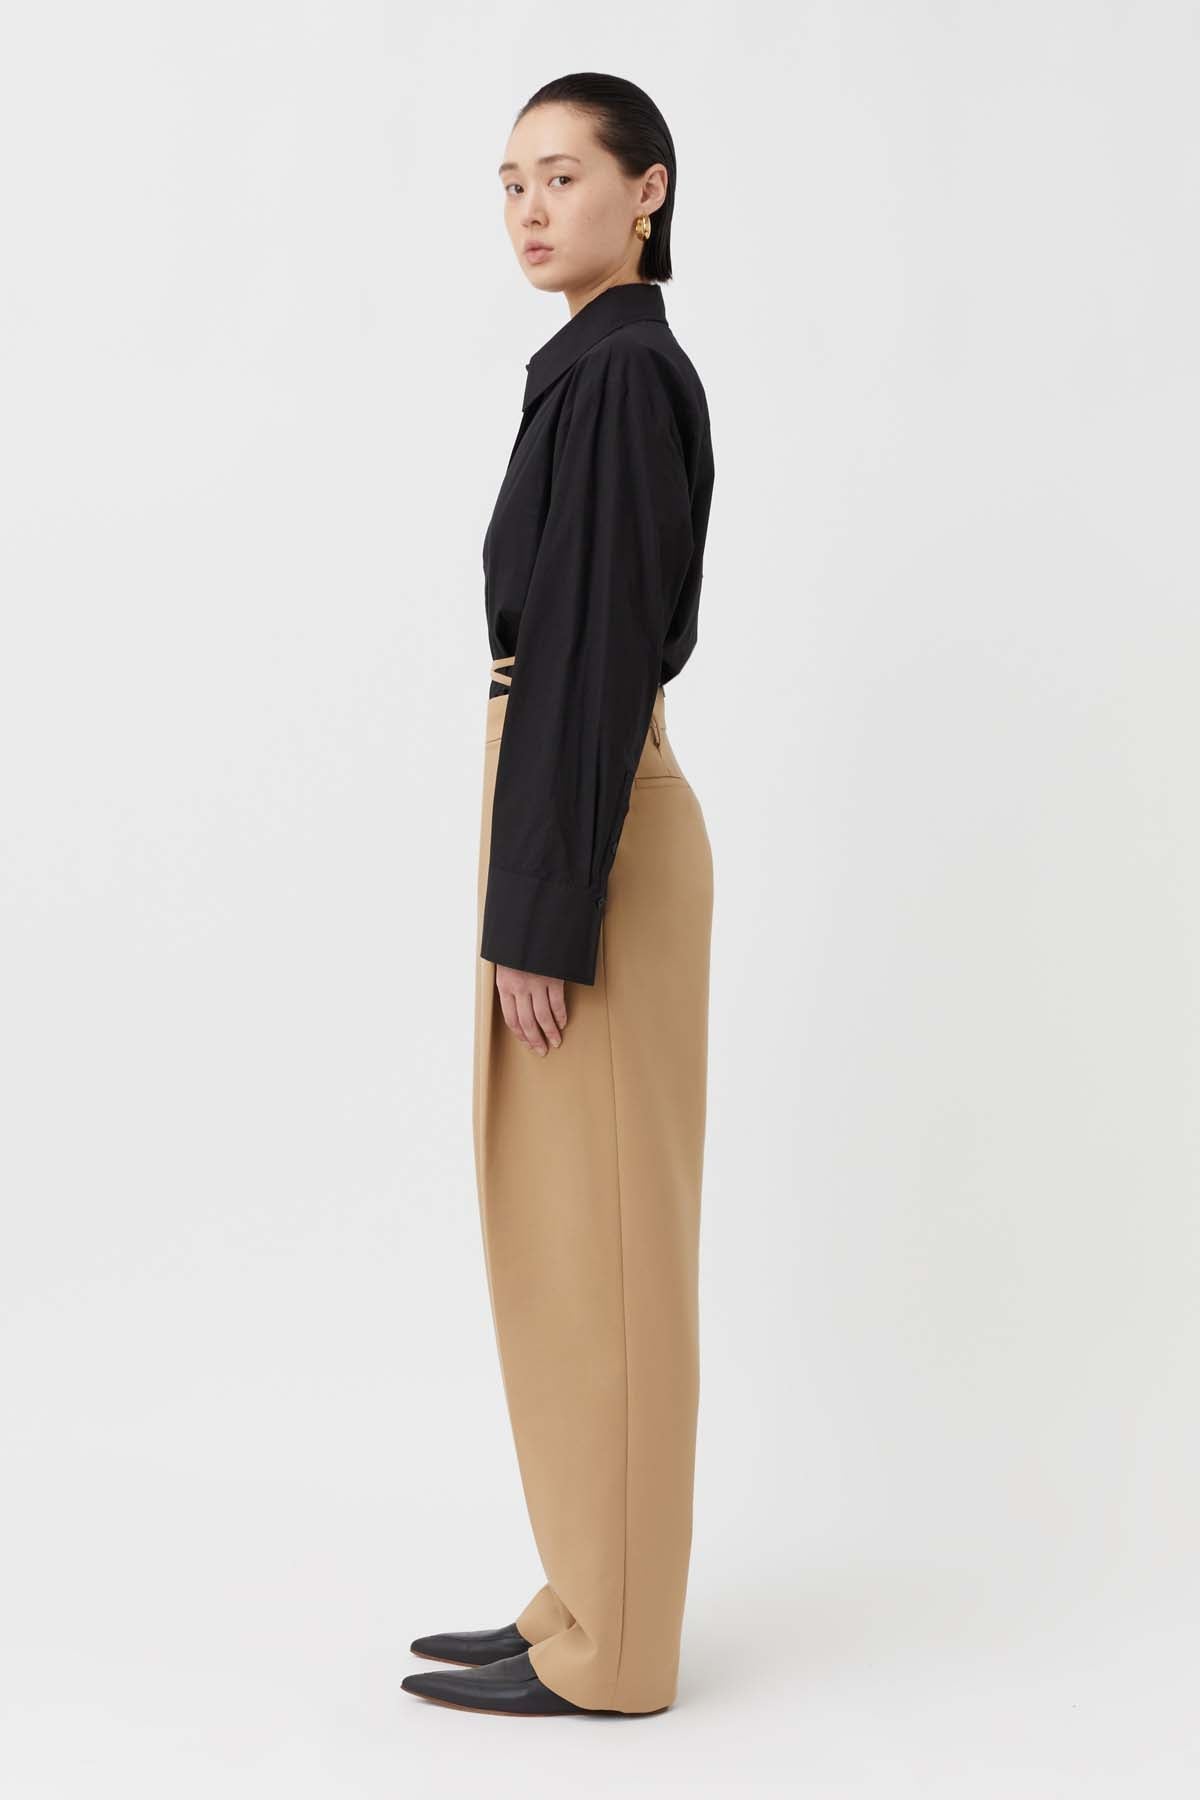 CAMILLA AND MARC | Sterling Tailored Pant - Camel